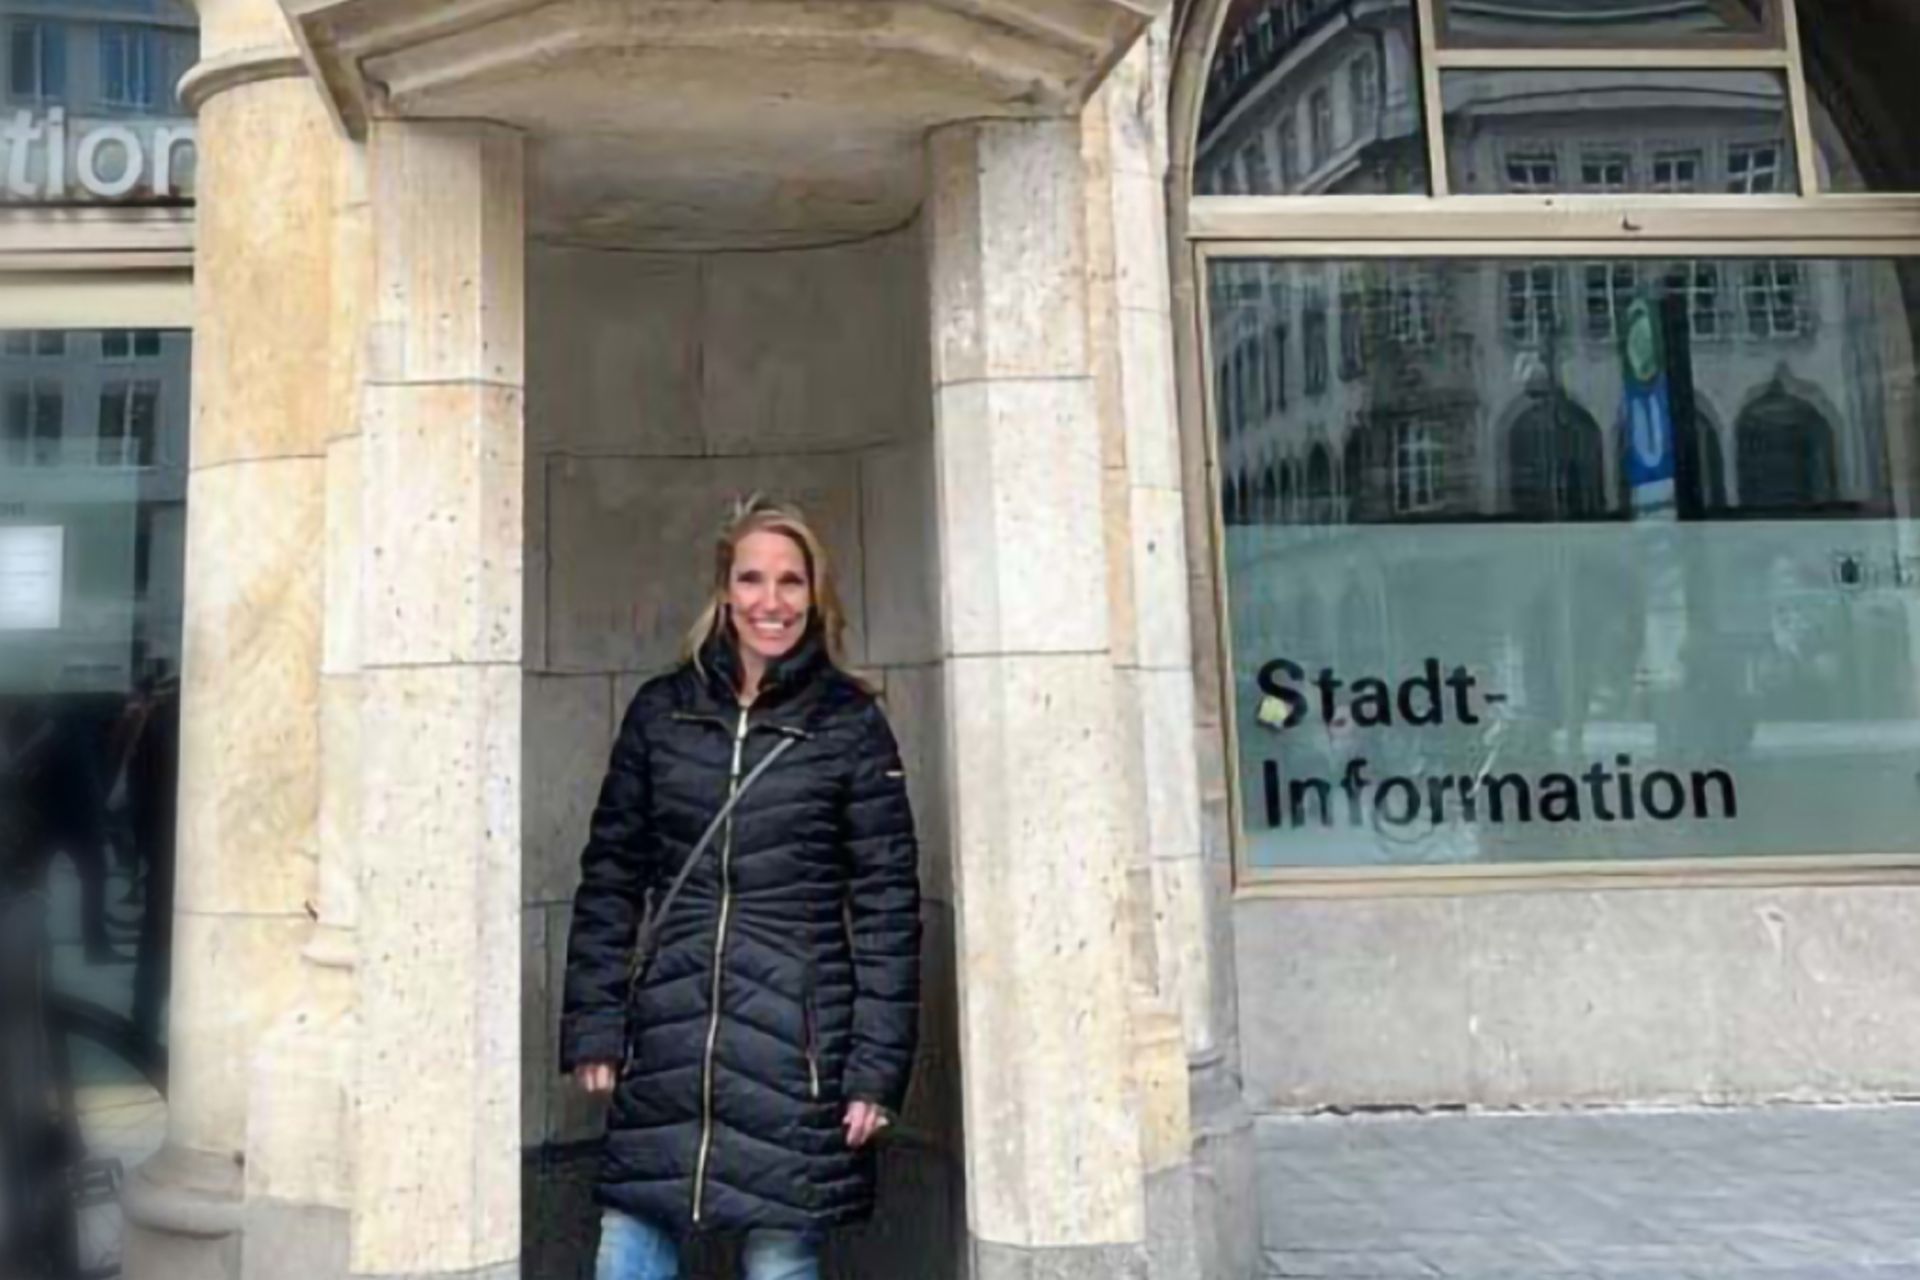 Exploring: Darcy in the center of Munich.